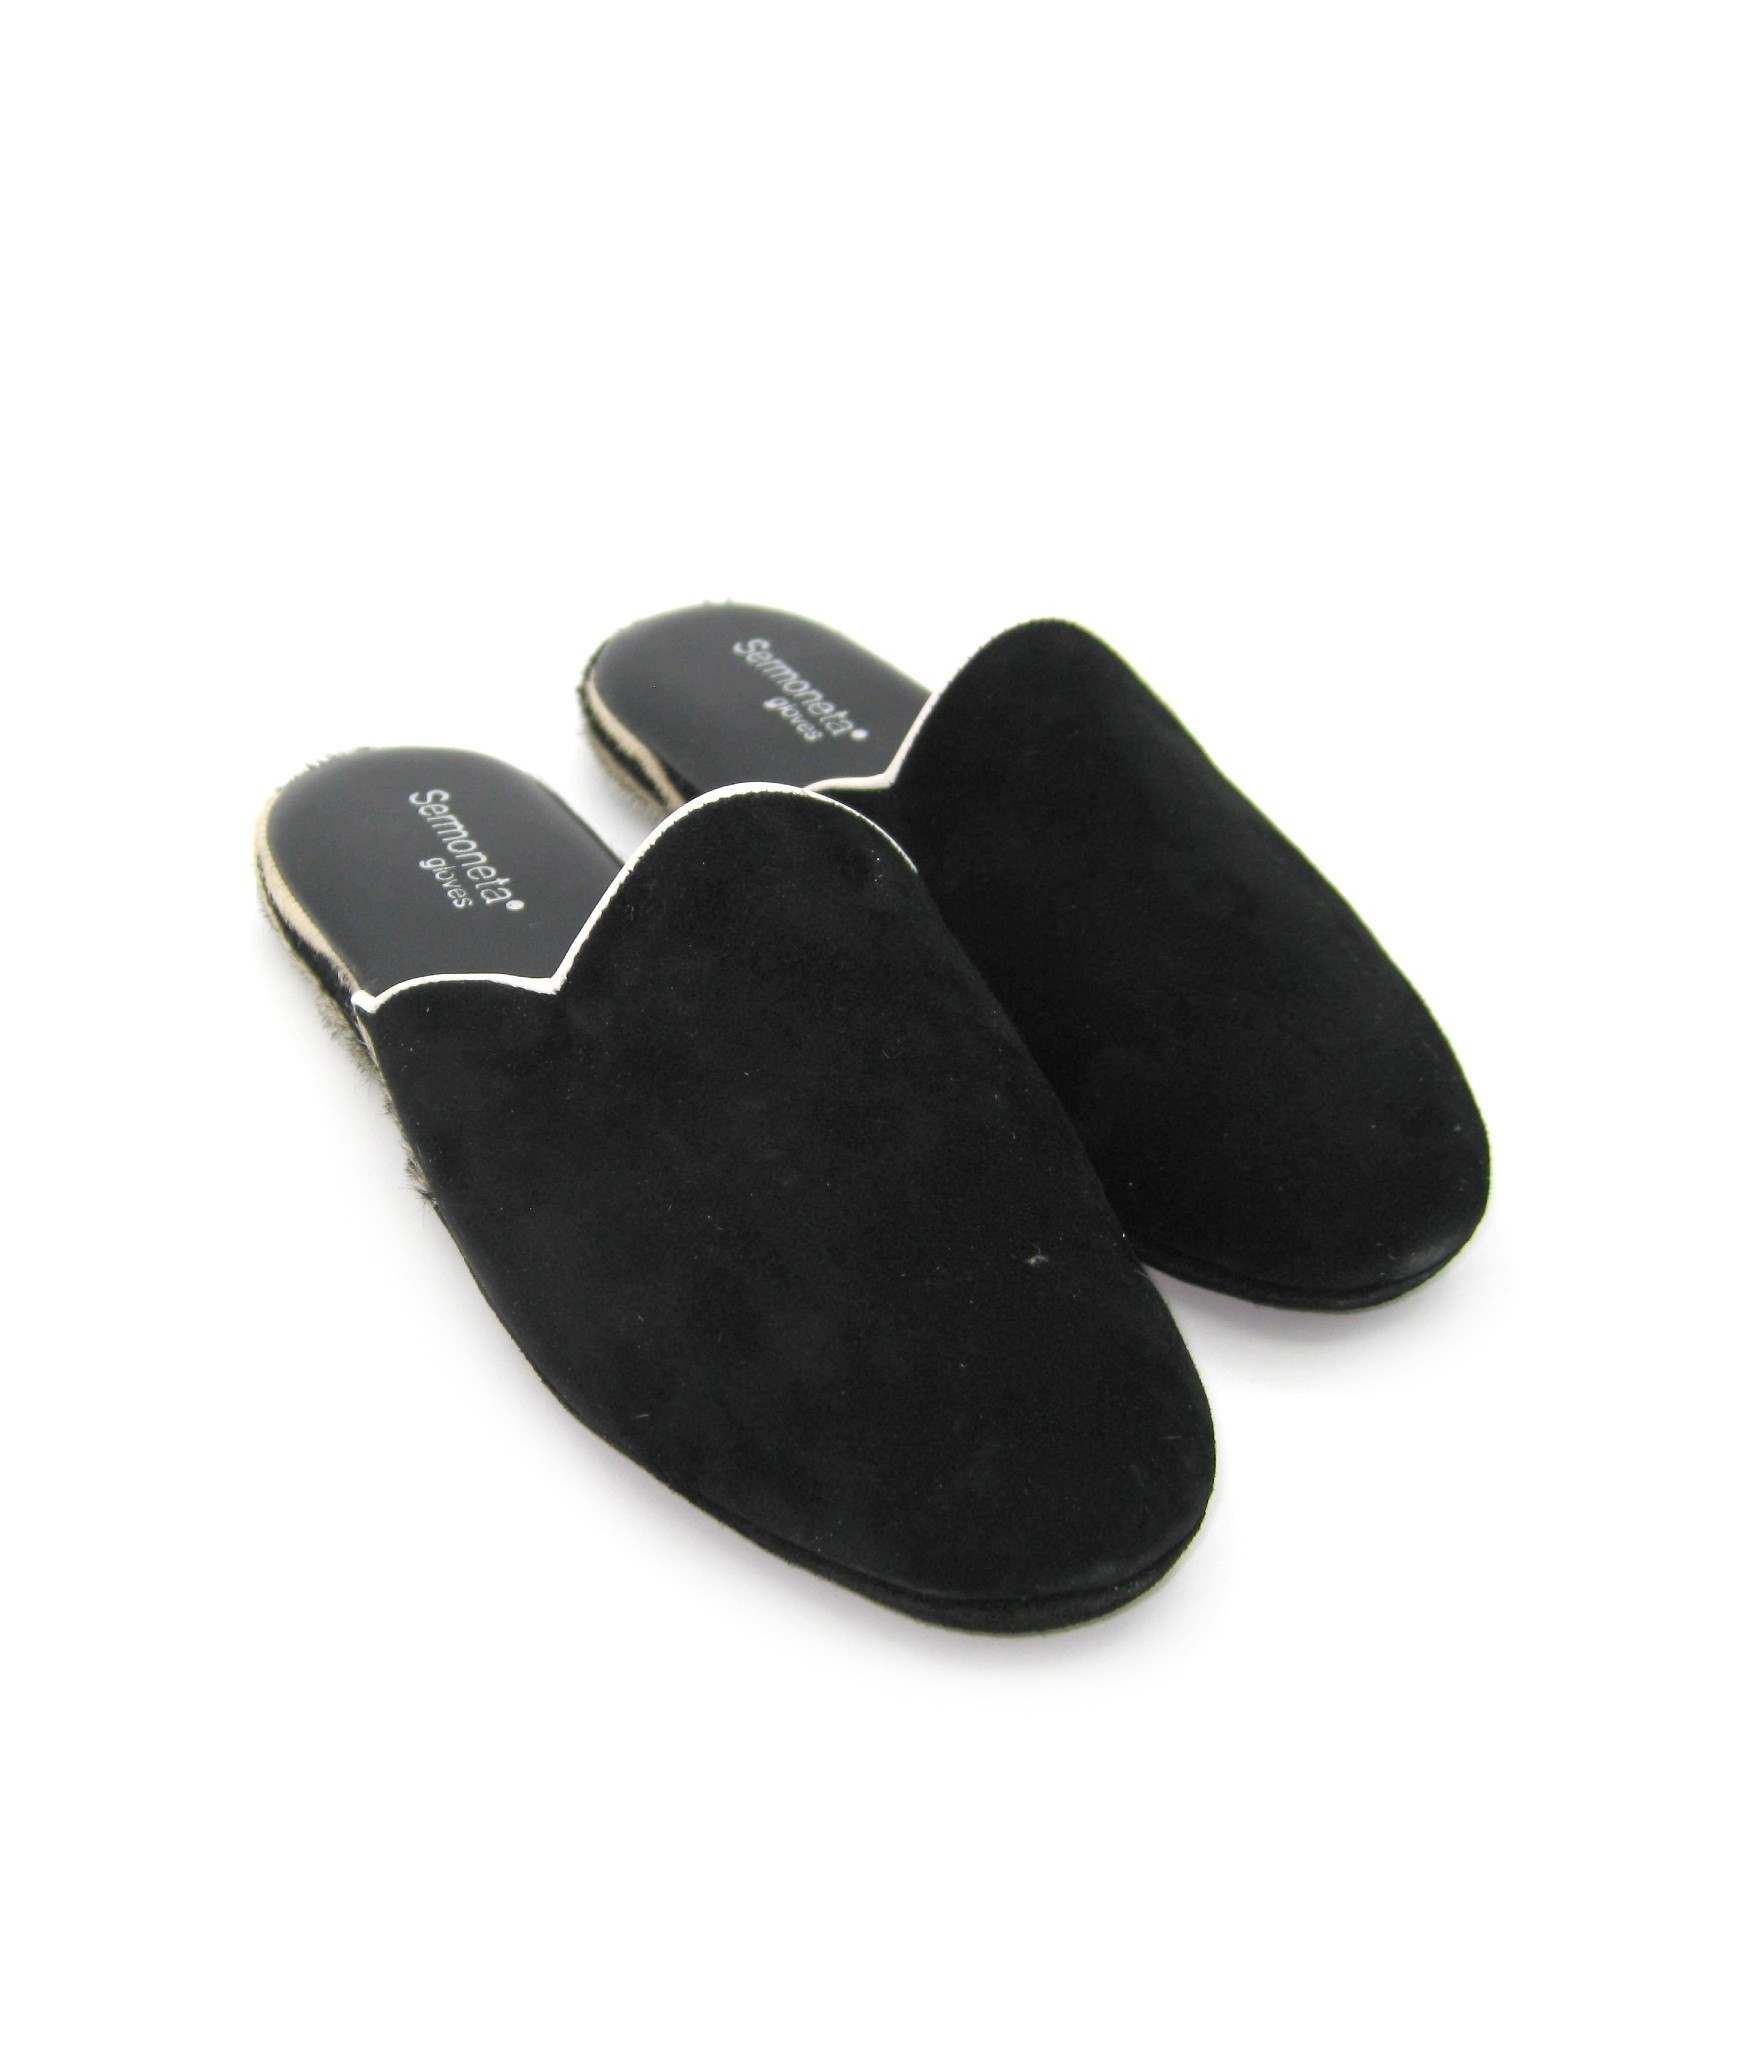 Accessories Woman Slippers Women's Slippers in Suede with Fur